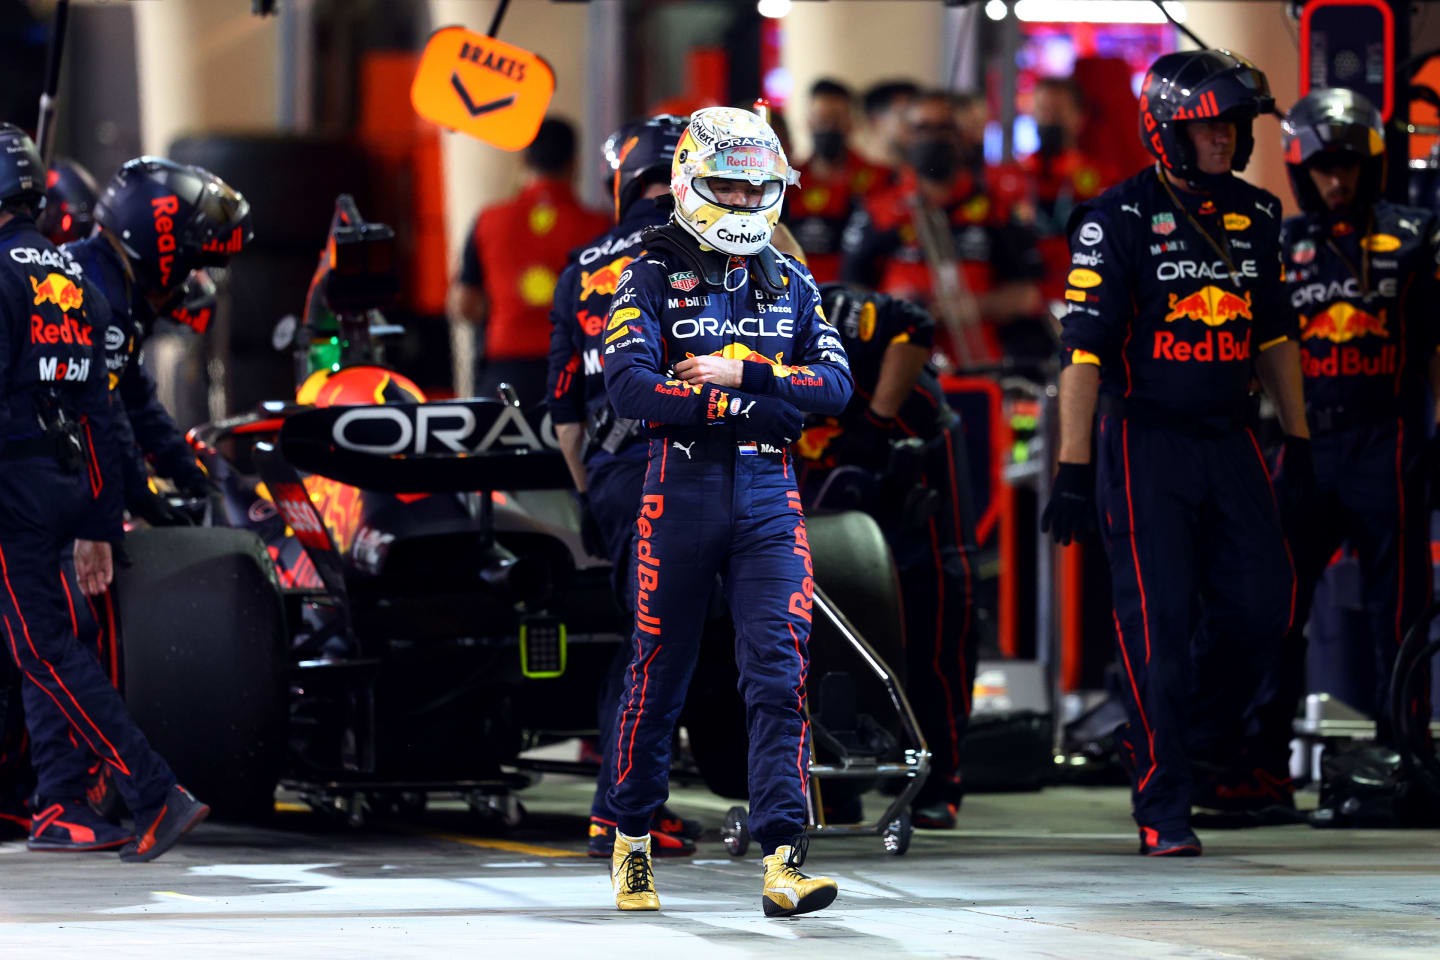 BAHRAIN, BAHRAIN - MARCH 20: Max Verstappen of the Netherlands and Oracle Red Bull Racing looks dejected as he walks from his car after retiring from the race during the F1 Grand Prix of Bahrain at Bahrain International Circuit on March 20, 2022 in Bahrain, Bahrain. (Photo by Clive Rose - Formula 1/Formula 1 via Getty Images)